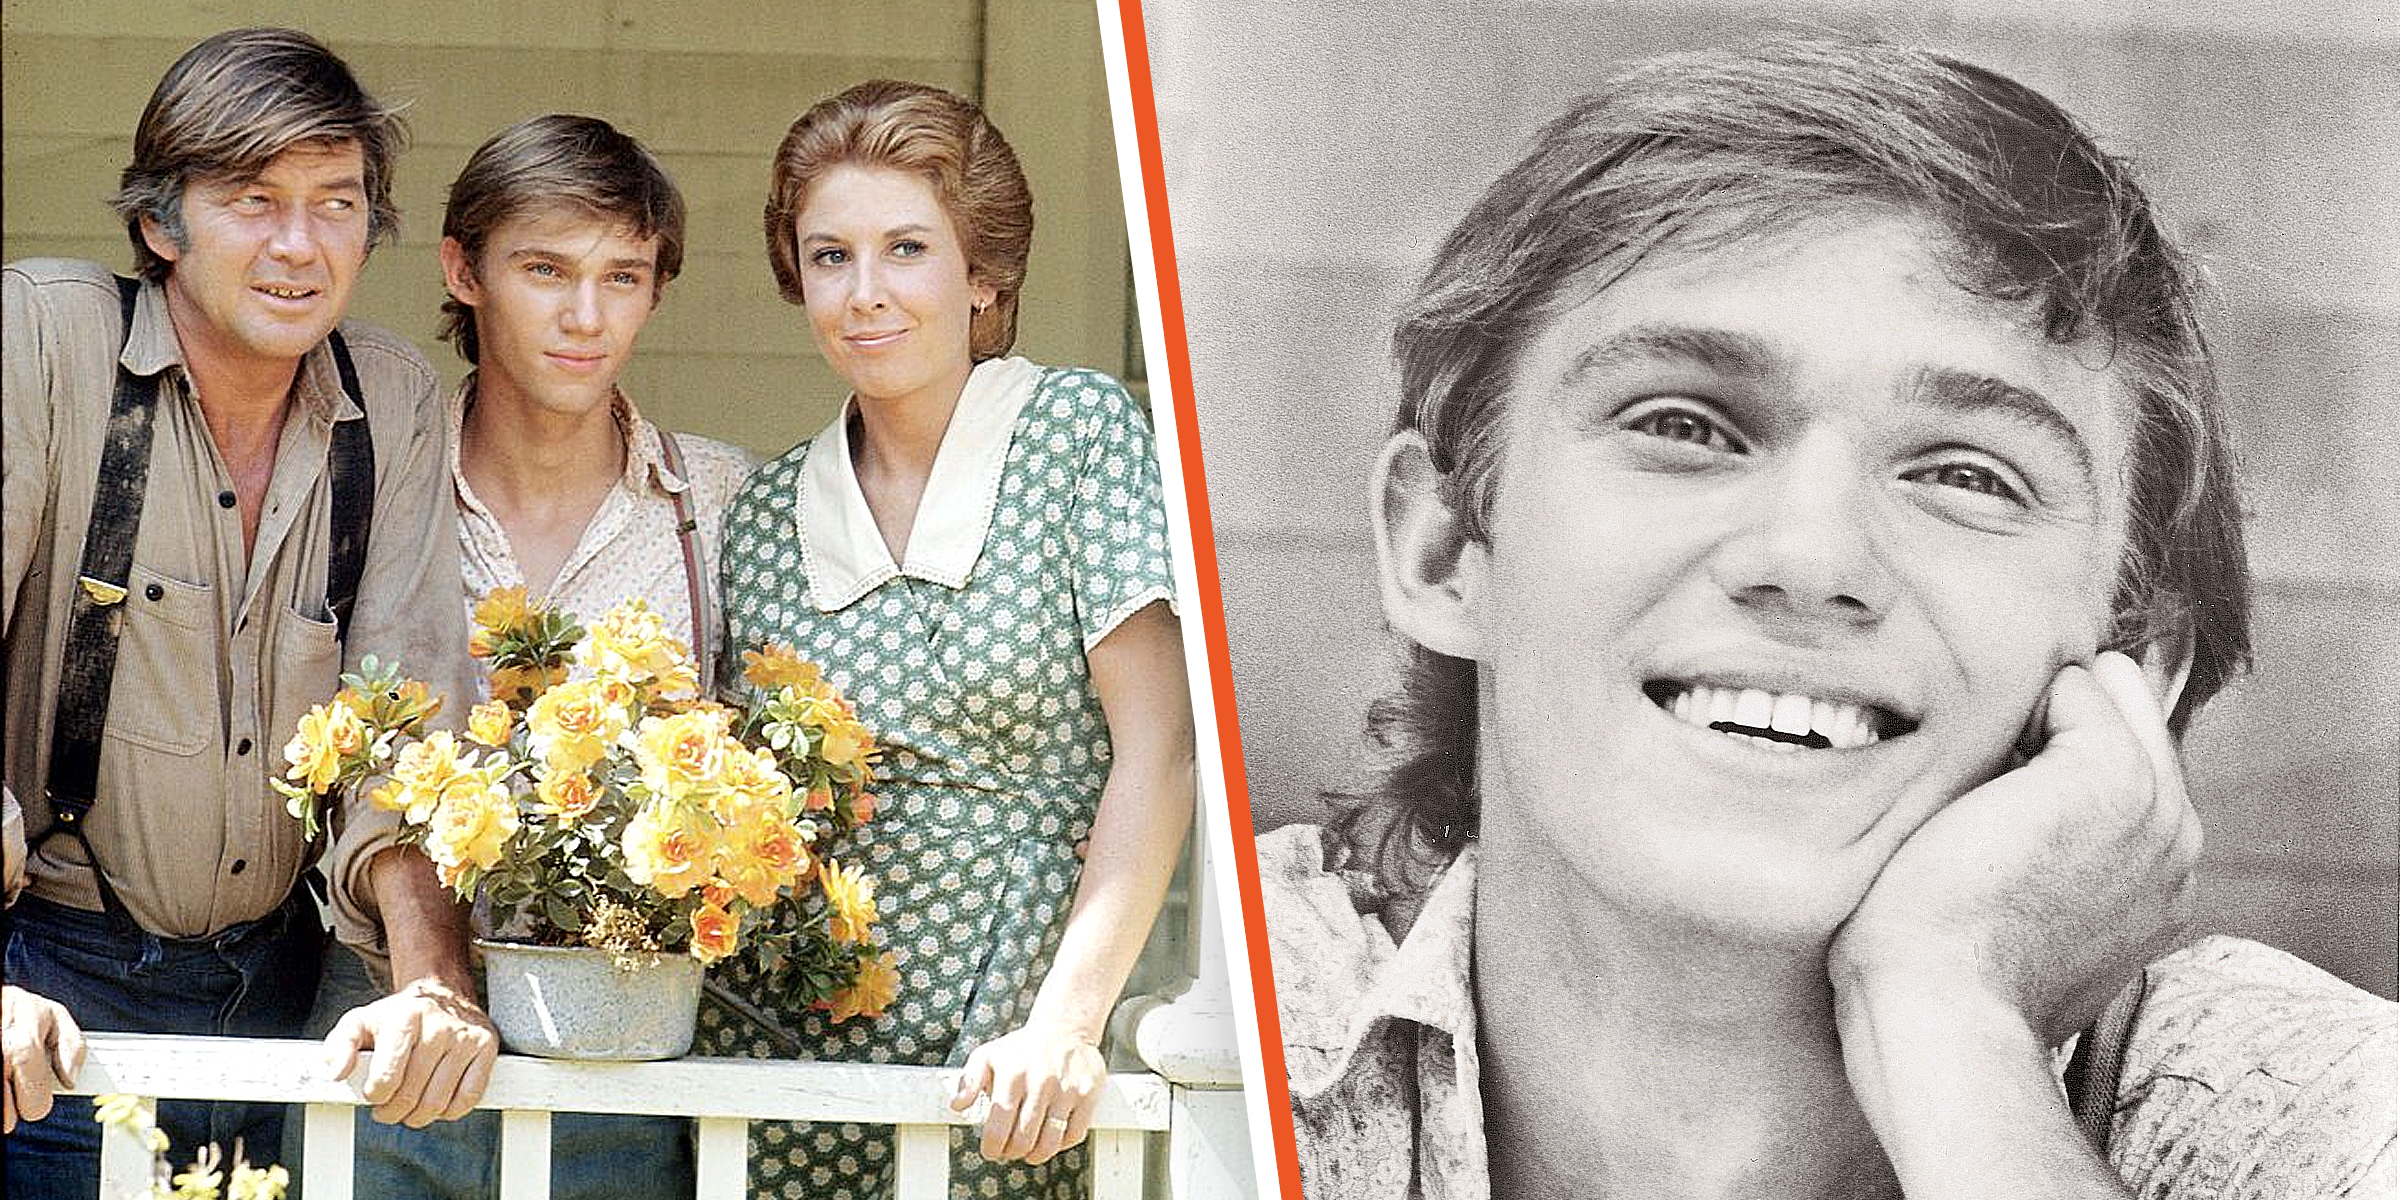 Ralph Waite, Richard Thomas, and Michael Learned, 1974 | Richard Thomas, 1970 | Source: Getty Images